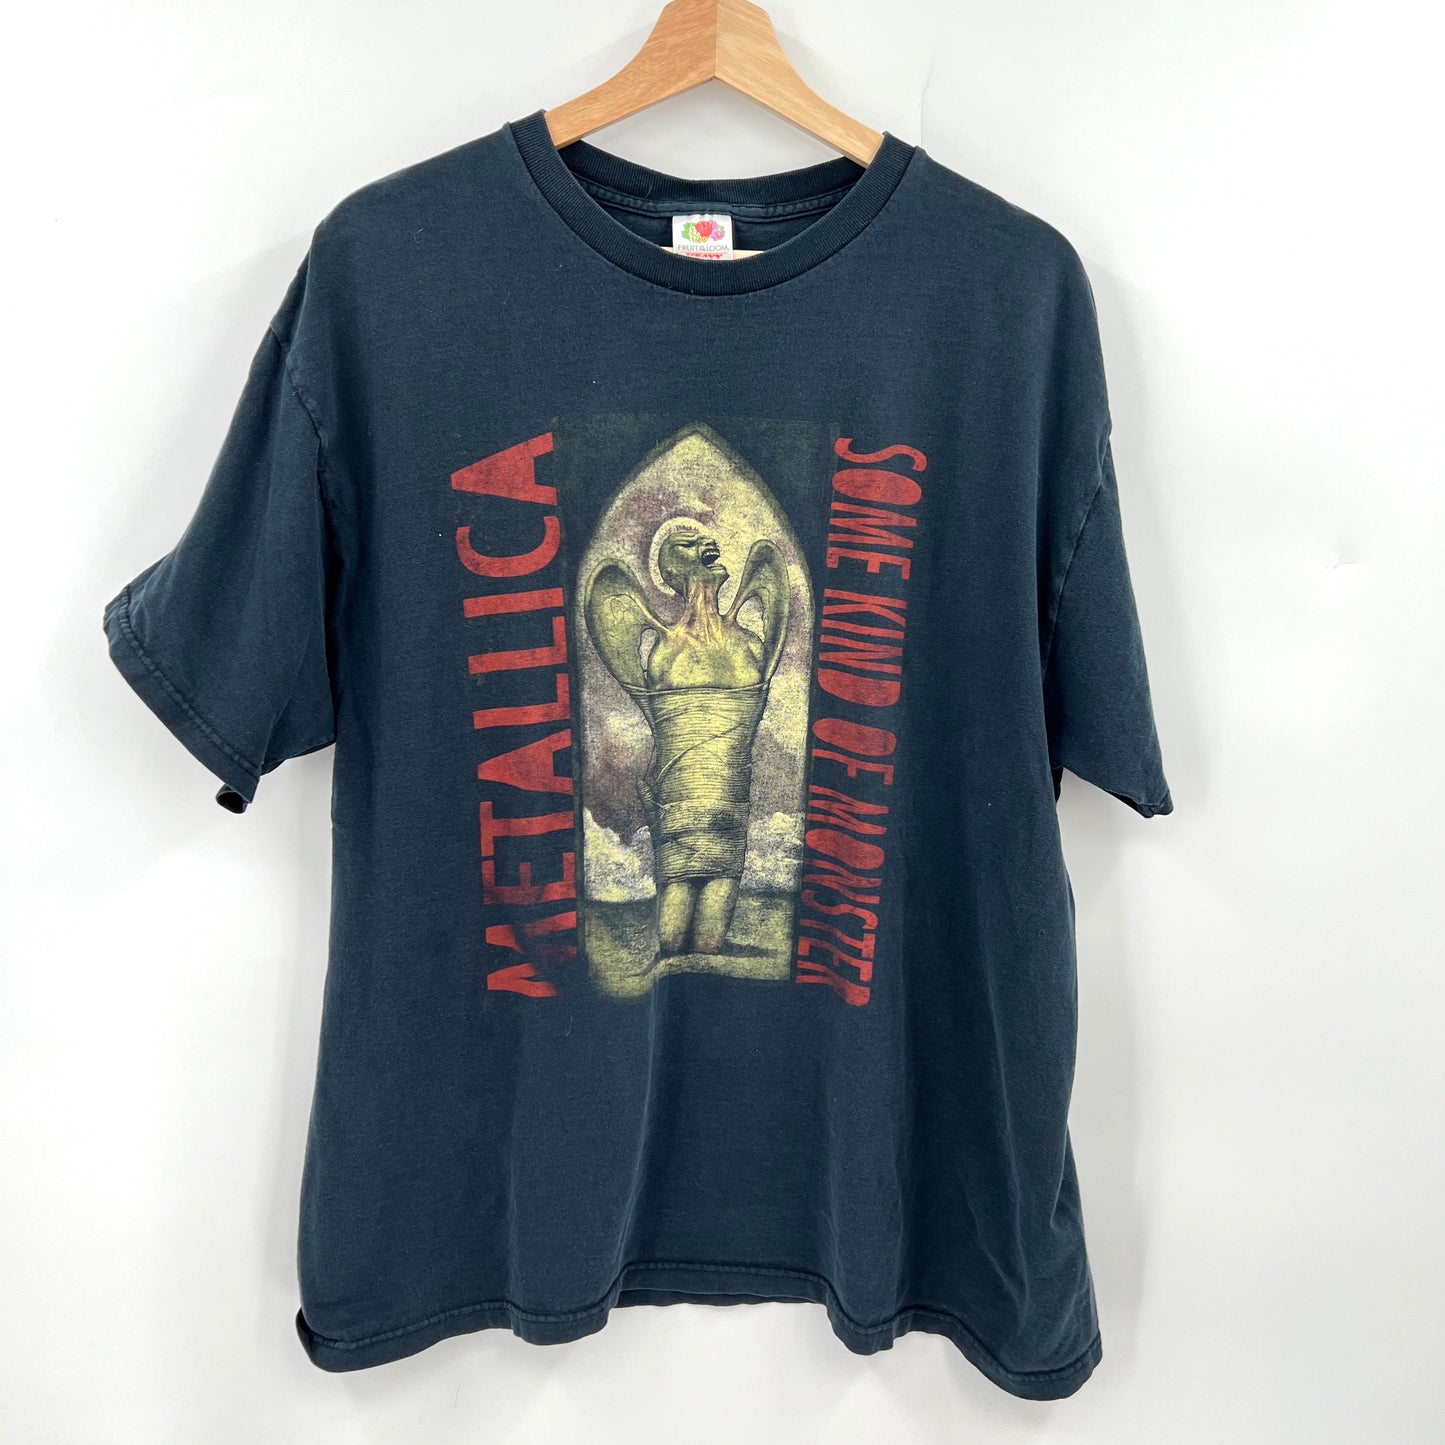 SOLD. Metallica Some Kind of Monster tee XL